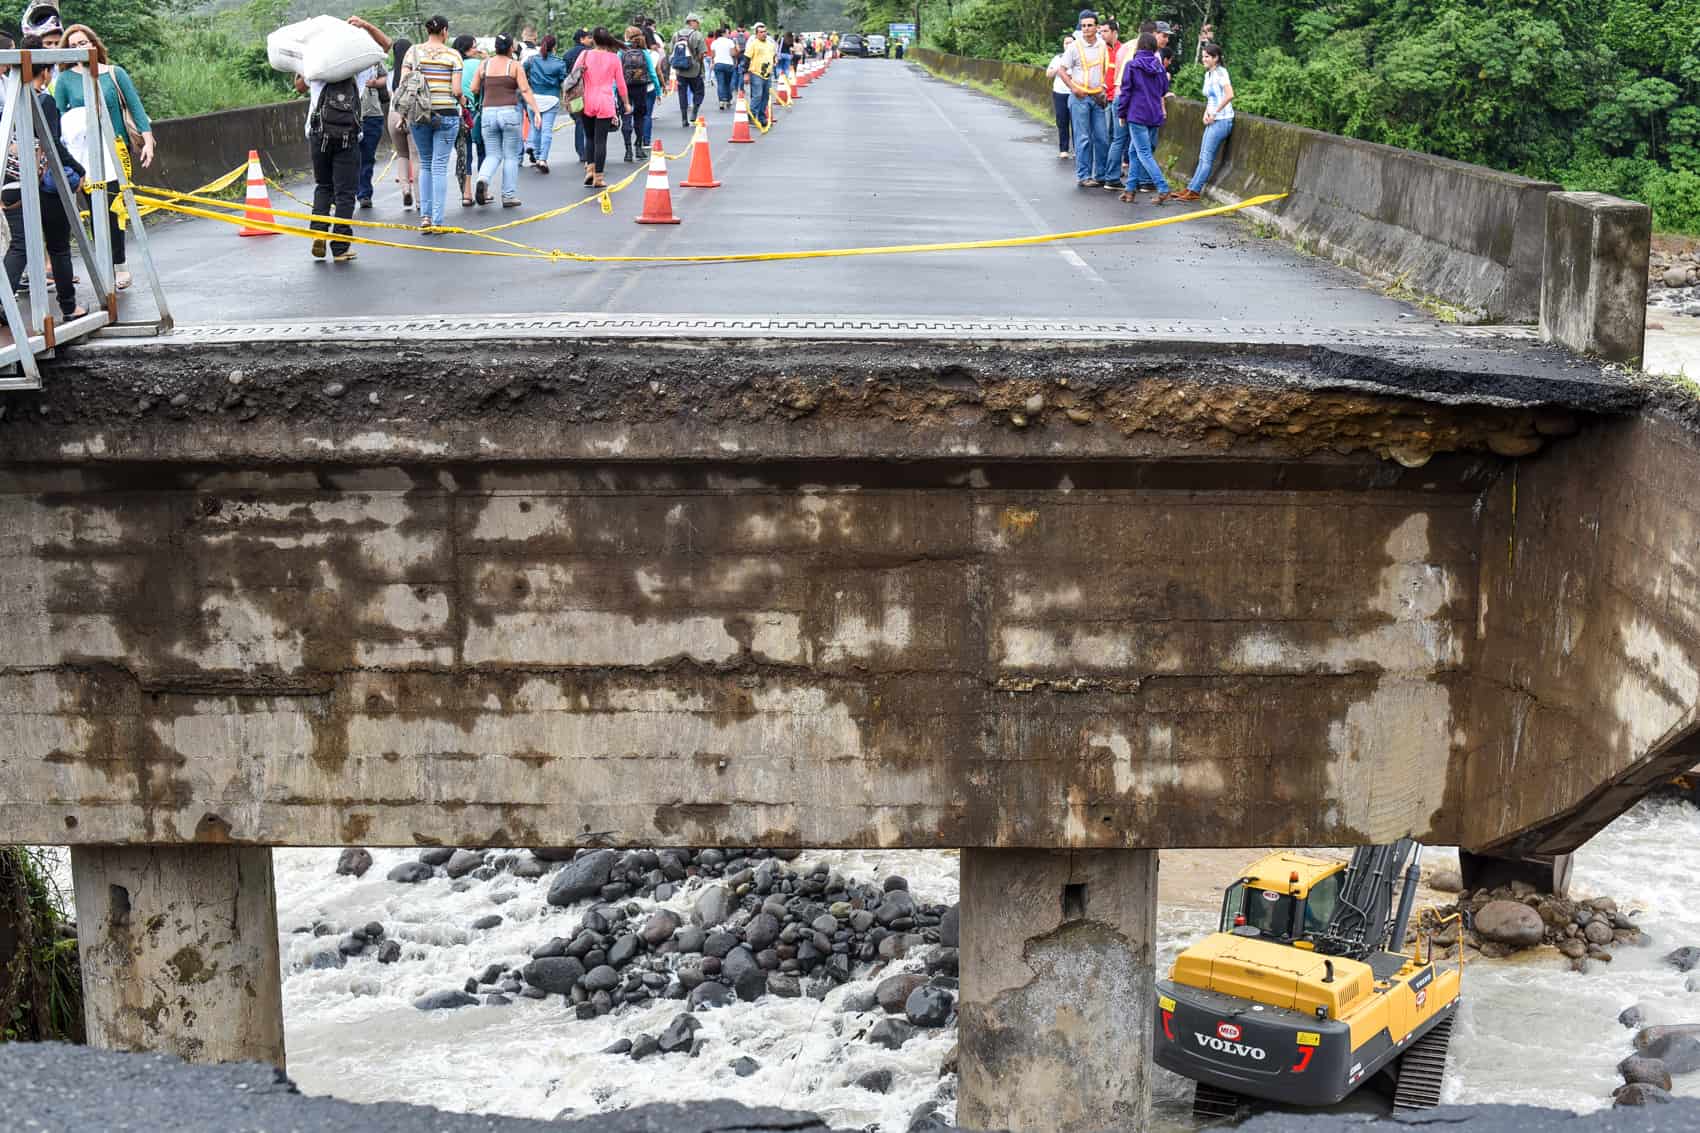 Part of the bridge over Río Sucio on the road to Sarapiquí in Guápiles, Limón was destroyed due to heavy rains and flooding last weekend.